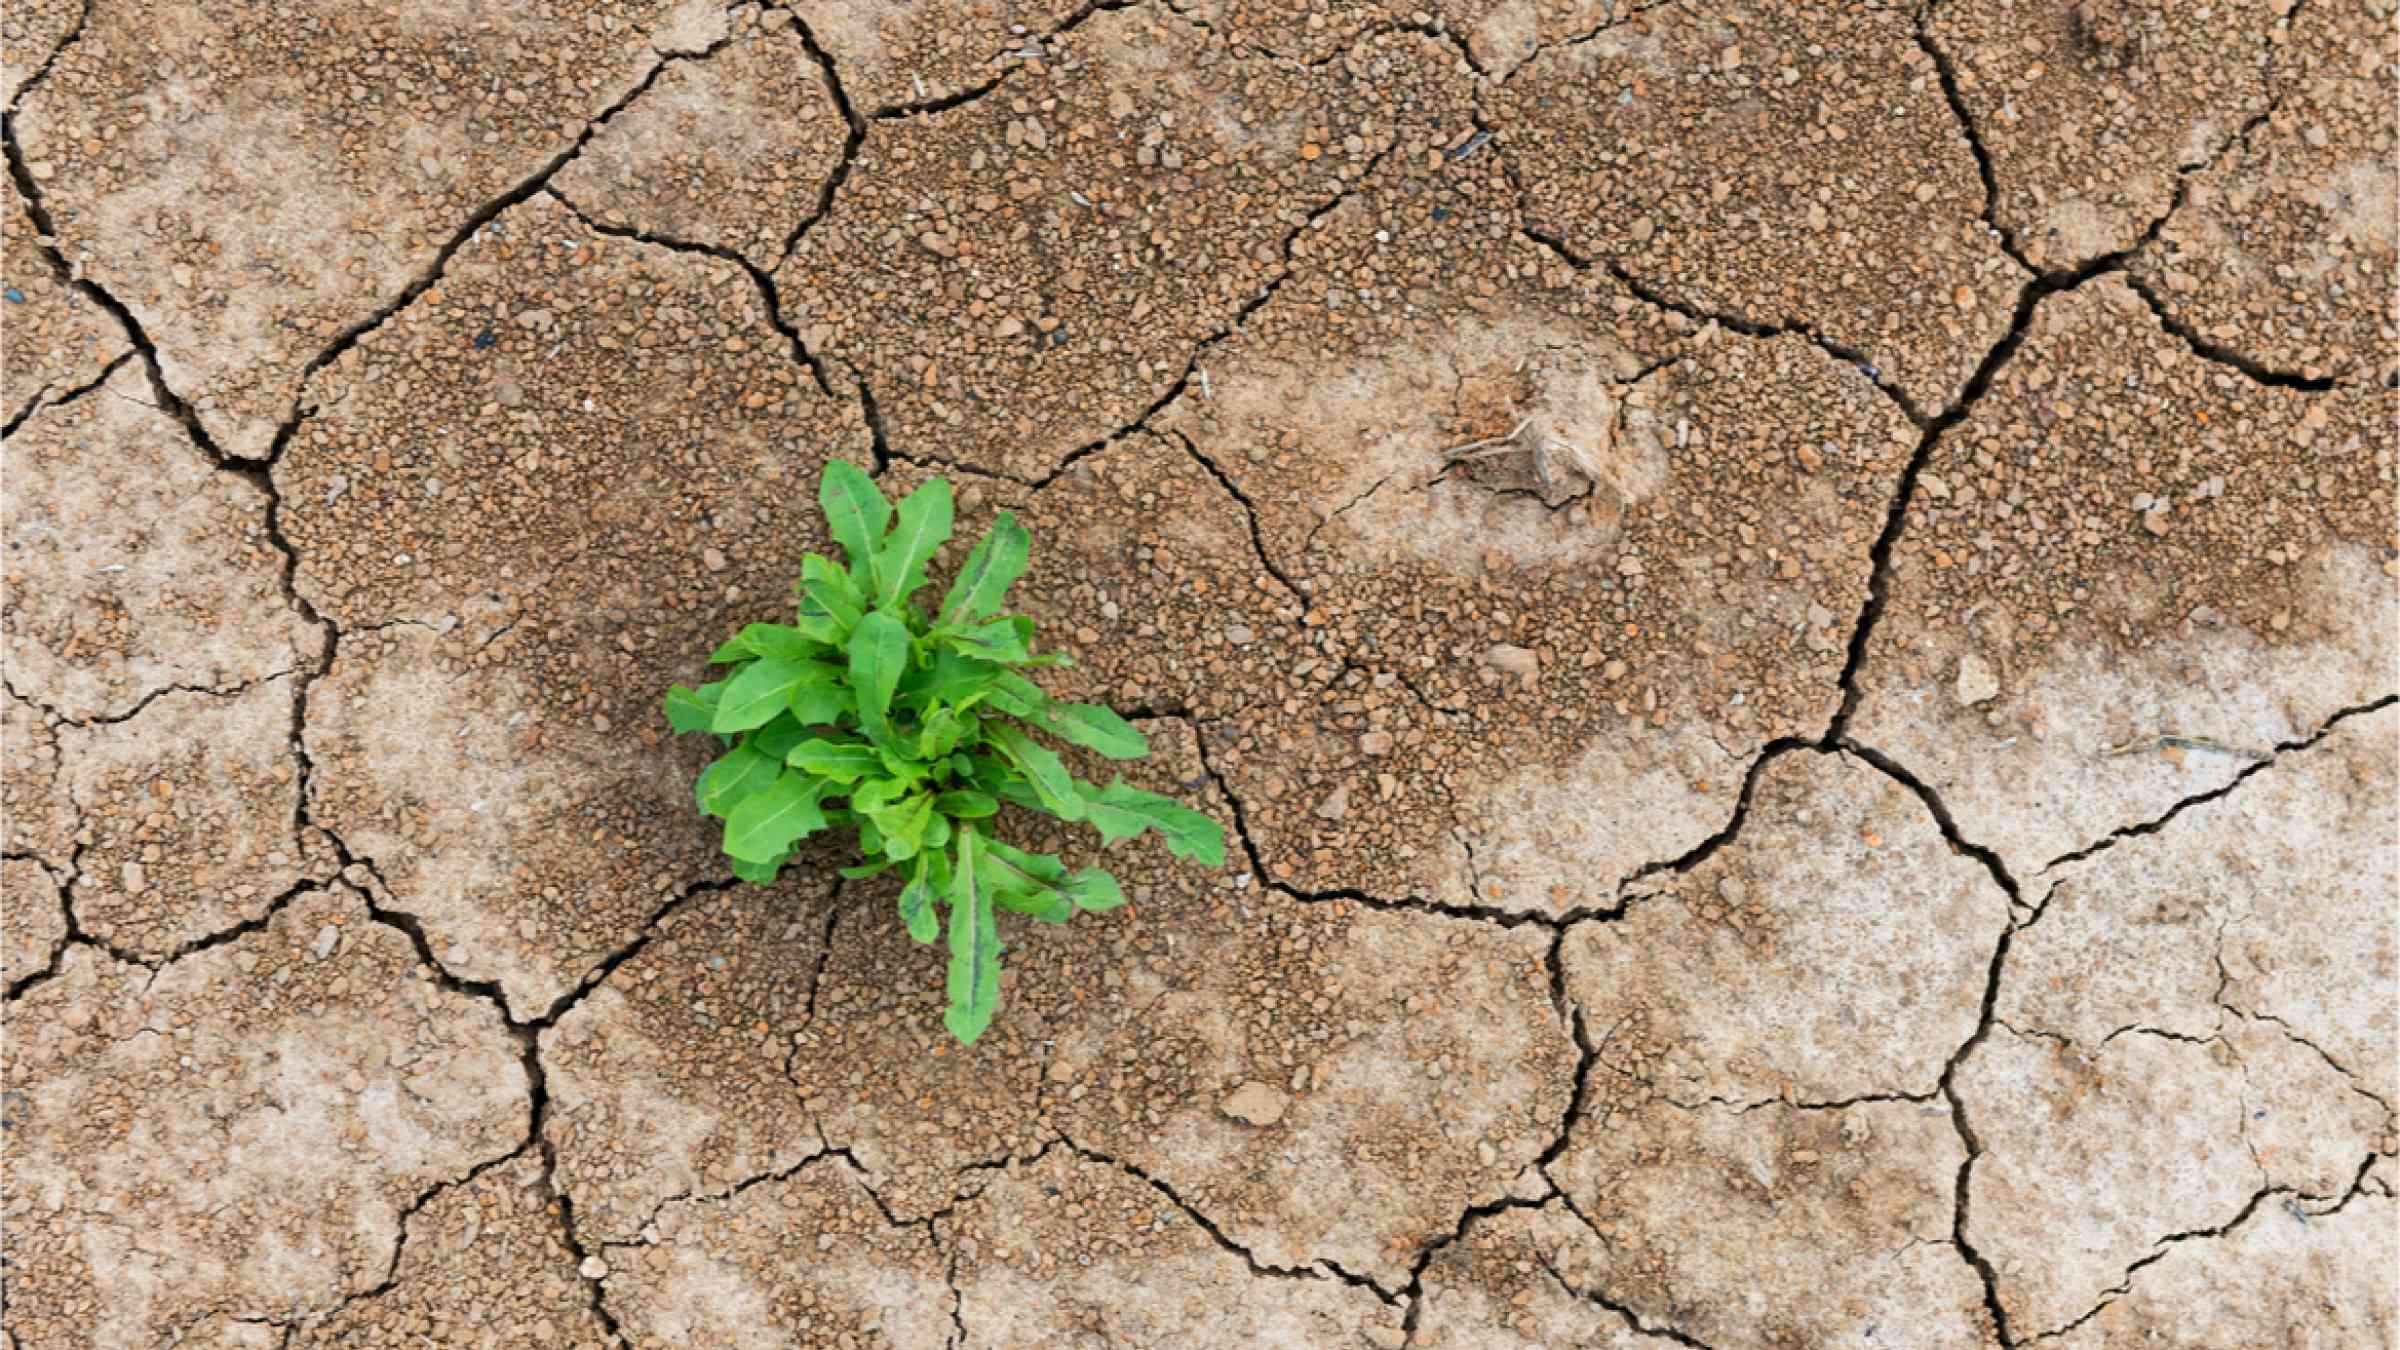 This image shows a green plant growing between the cracks of dry soil.